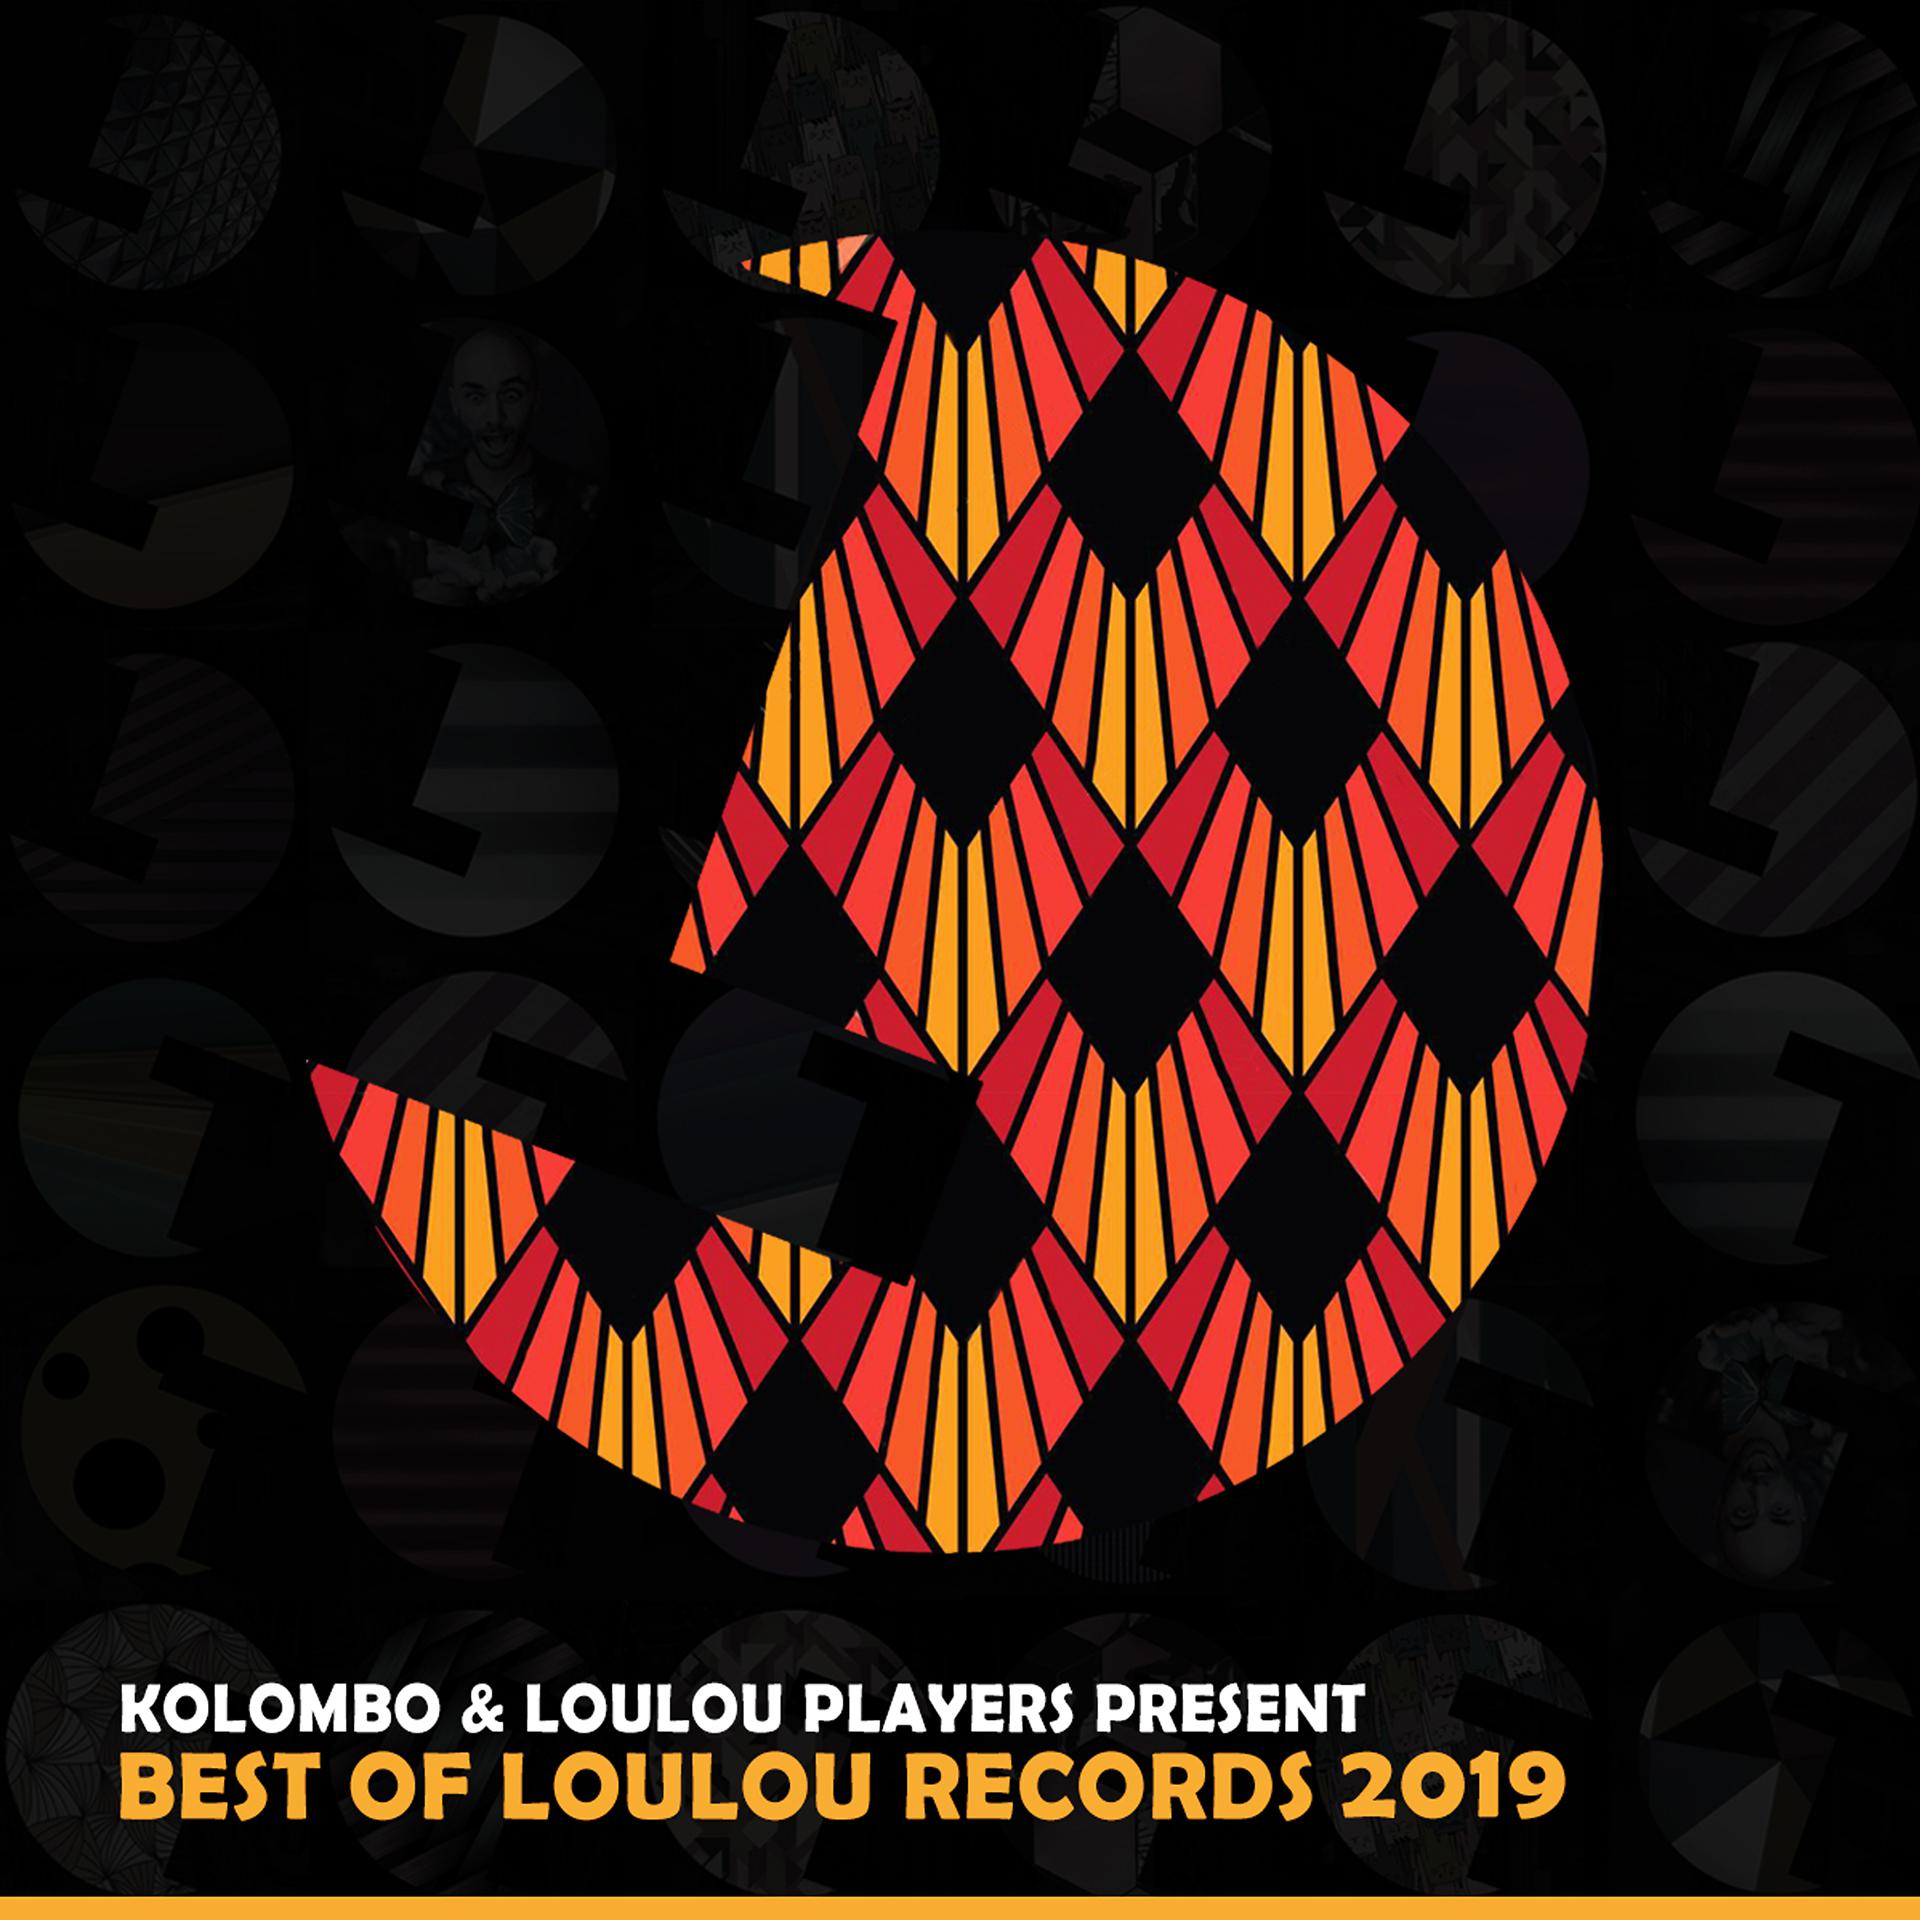 Постер альбома Kolombo & Loulou Players Presents Best of Loulou Records 2019